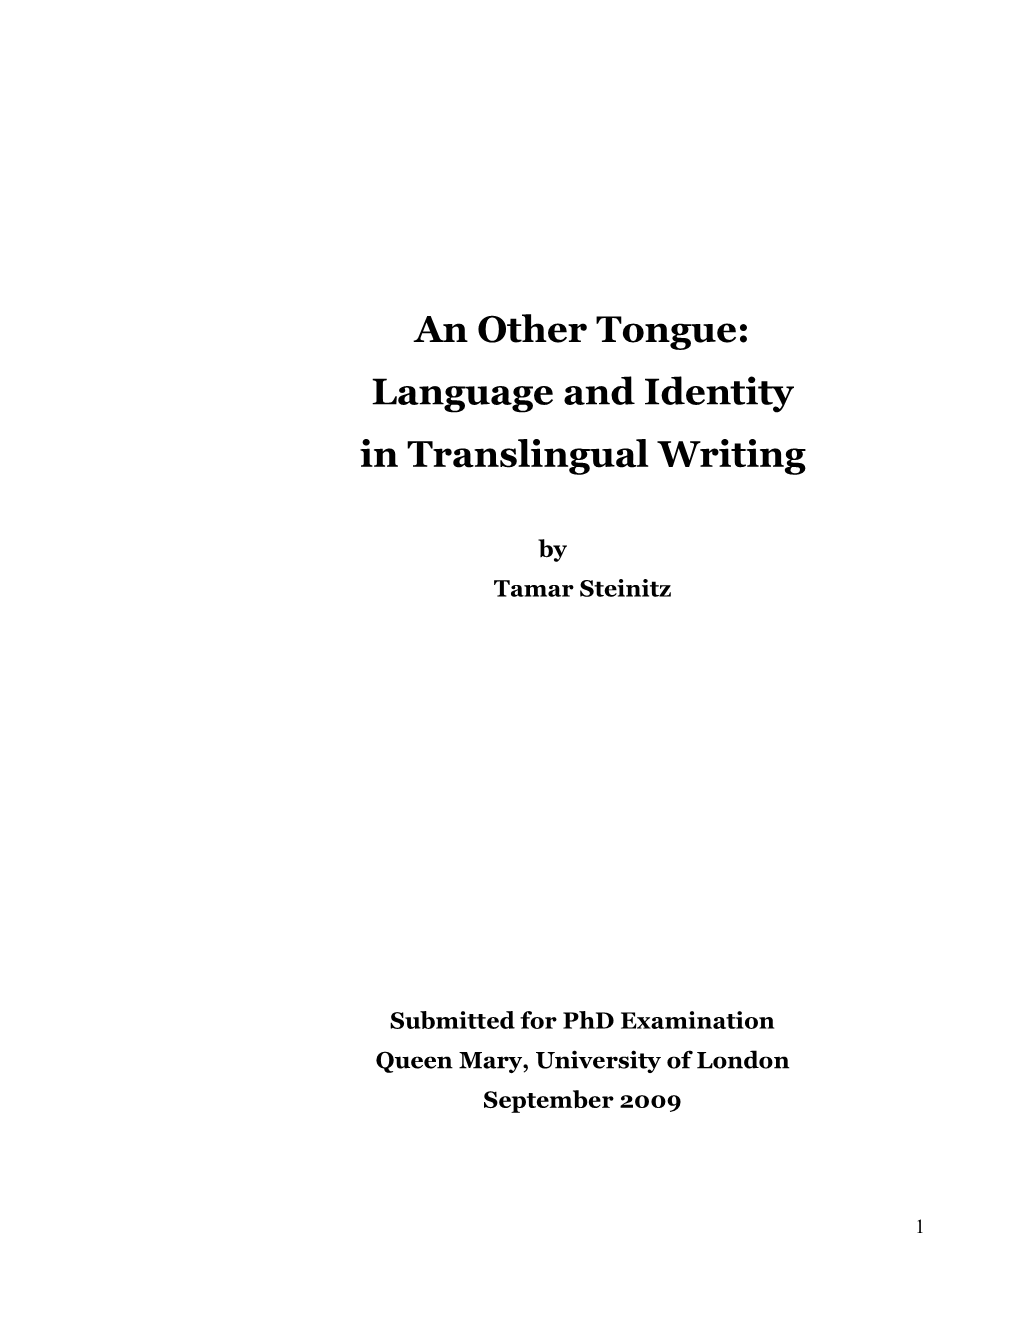 An Other Tongue: Language and Identity in Translingual Writing